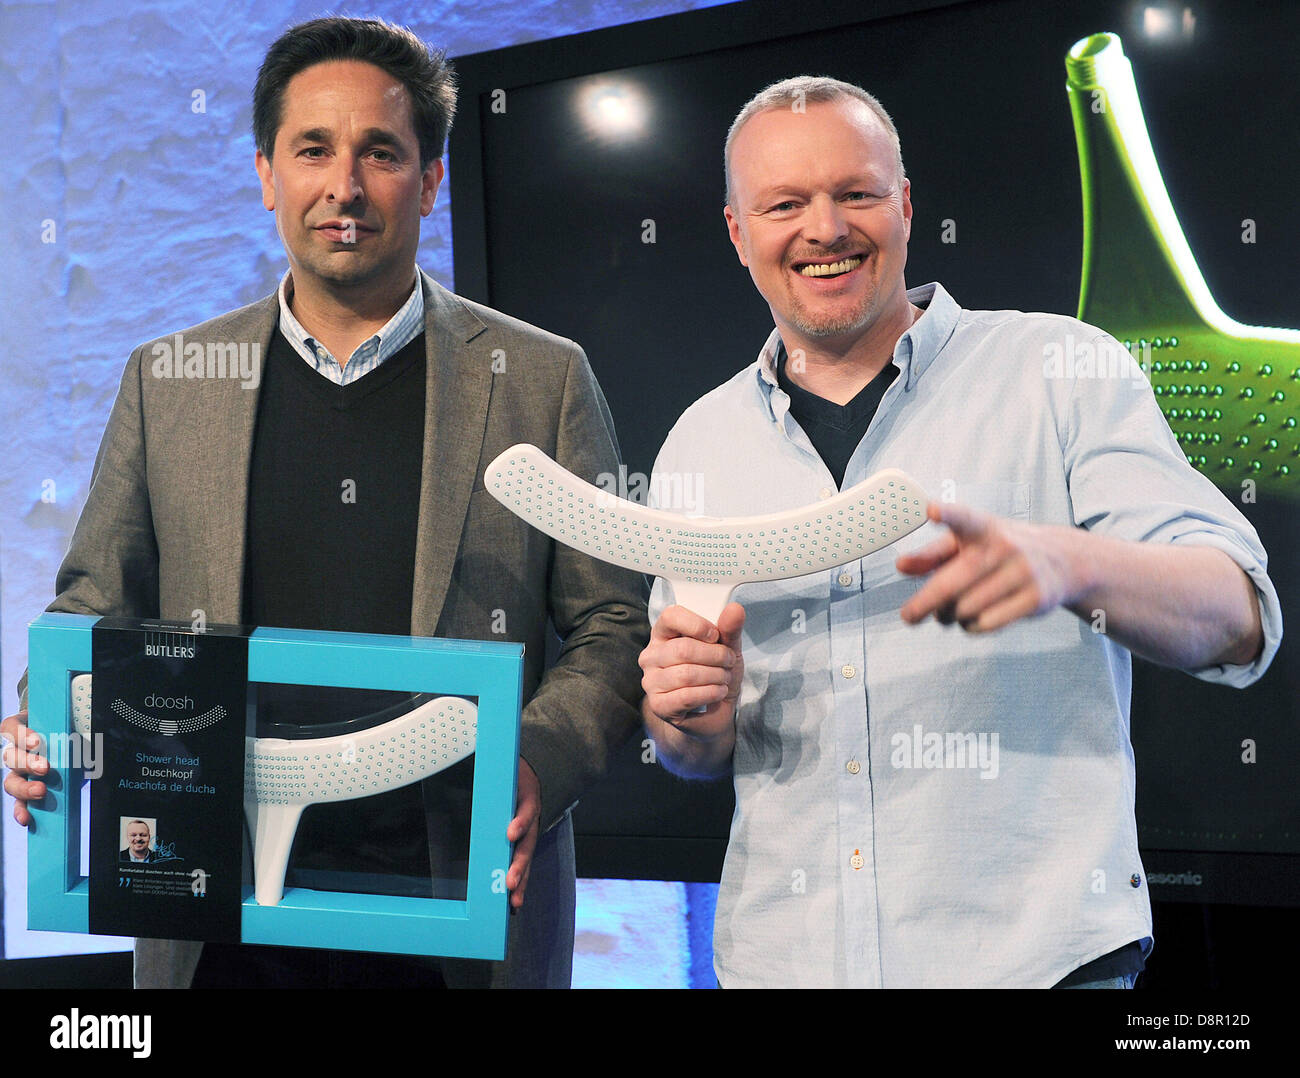 Managing director of chain of retail shops Butler, Wilhelm Josten (L), and  television presenter Stefan Raab present a shower head designed by Raab  called 'Doosh' in Cologne, Germany, 03 June 2013. Photo: HENNING